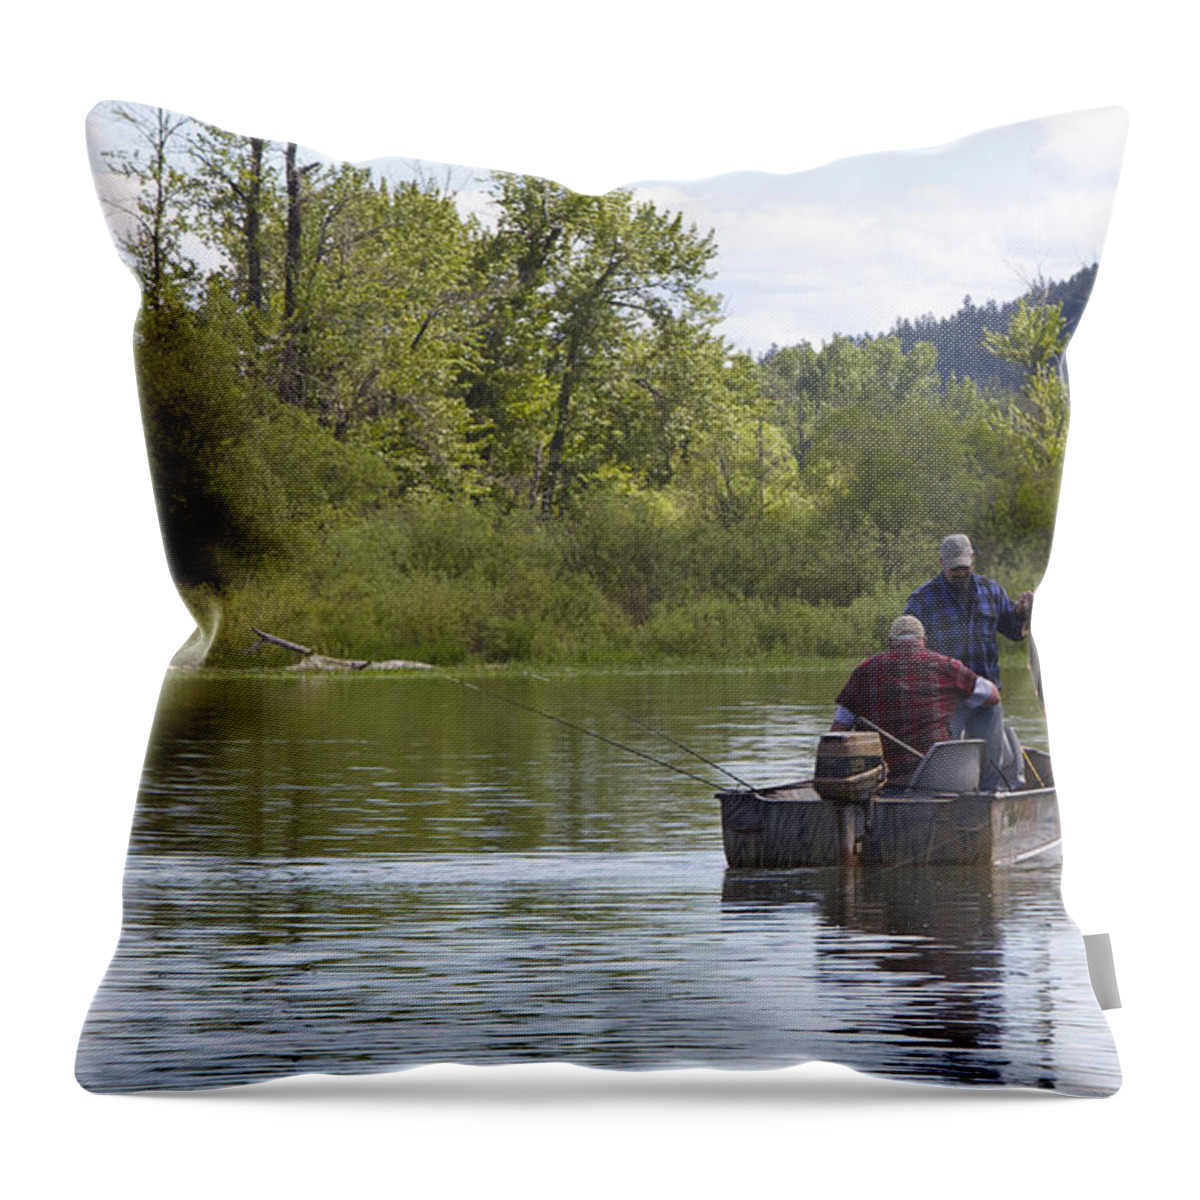 Gotcha Throw Pillow featuring the photograph Gotcha by Nina Prommer